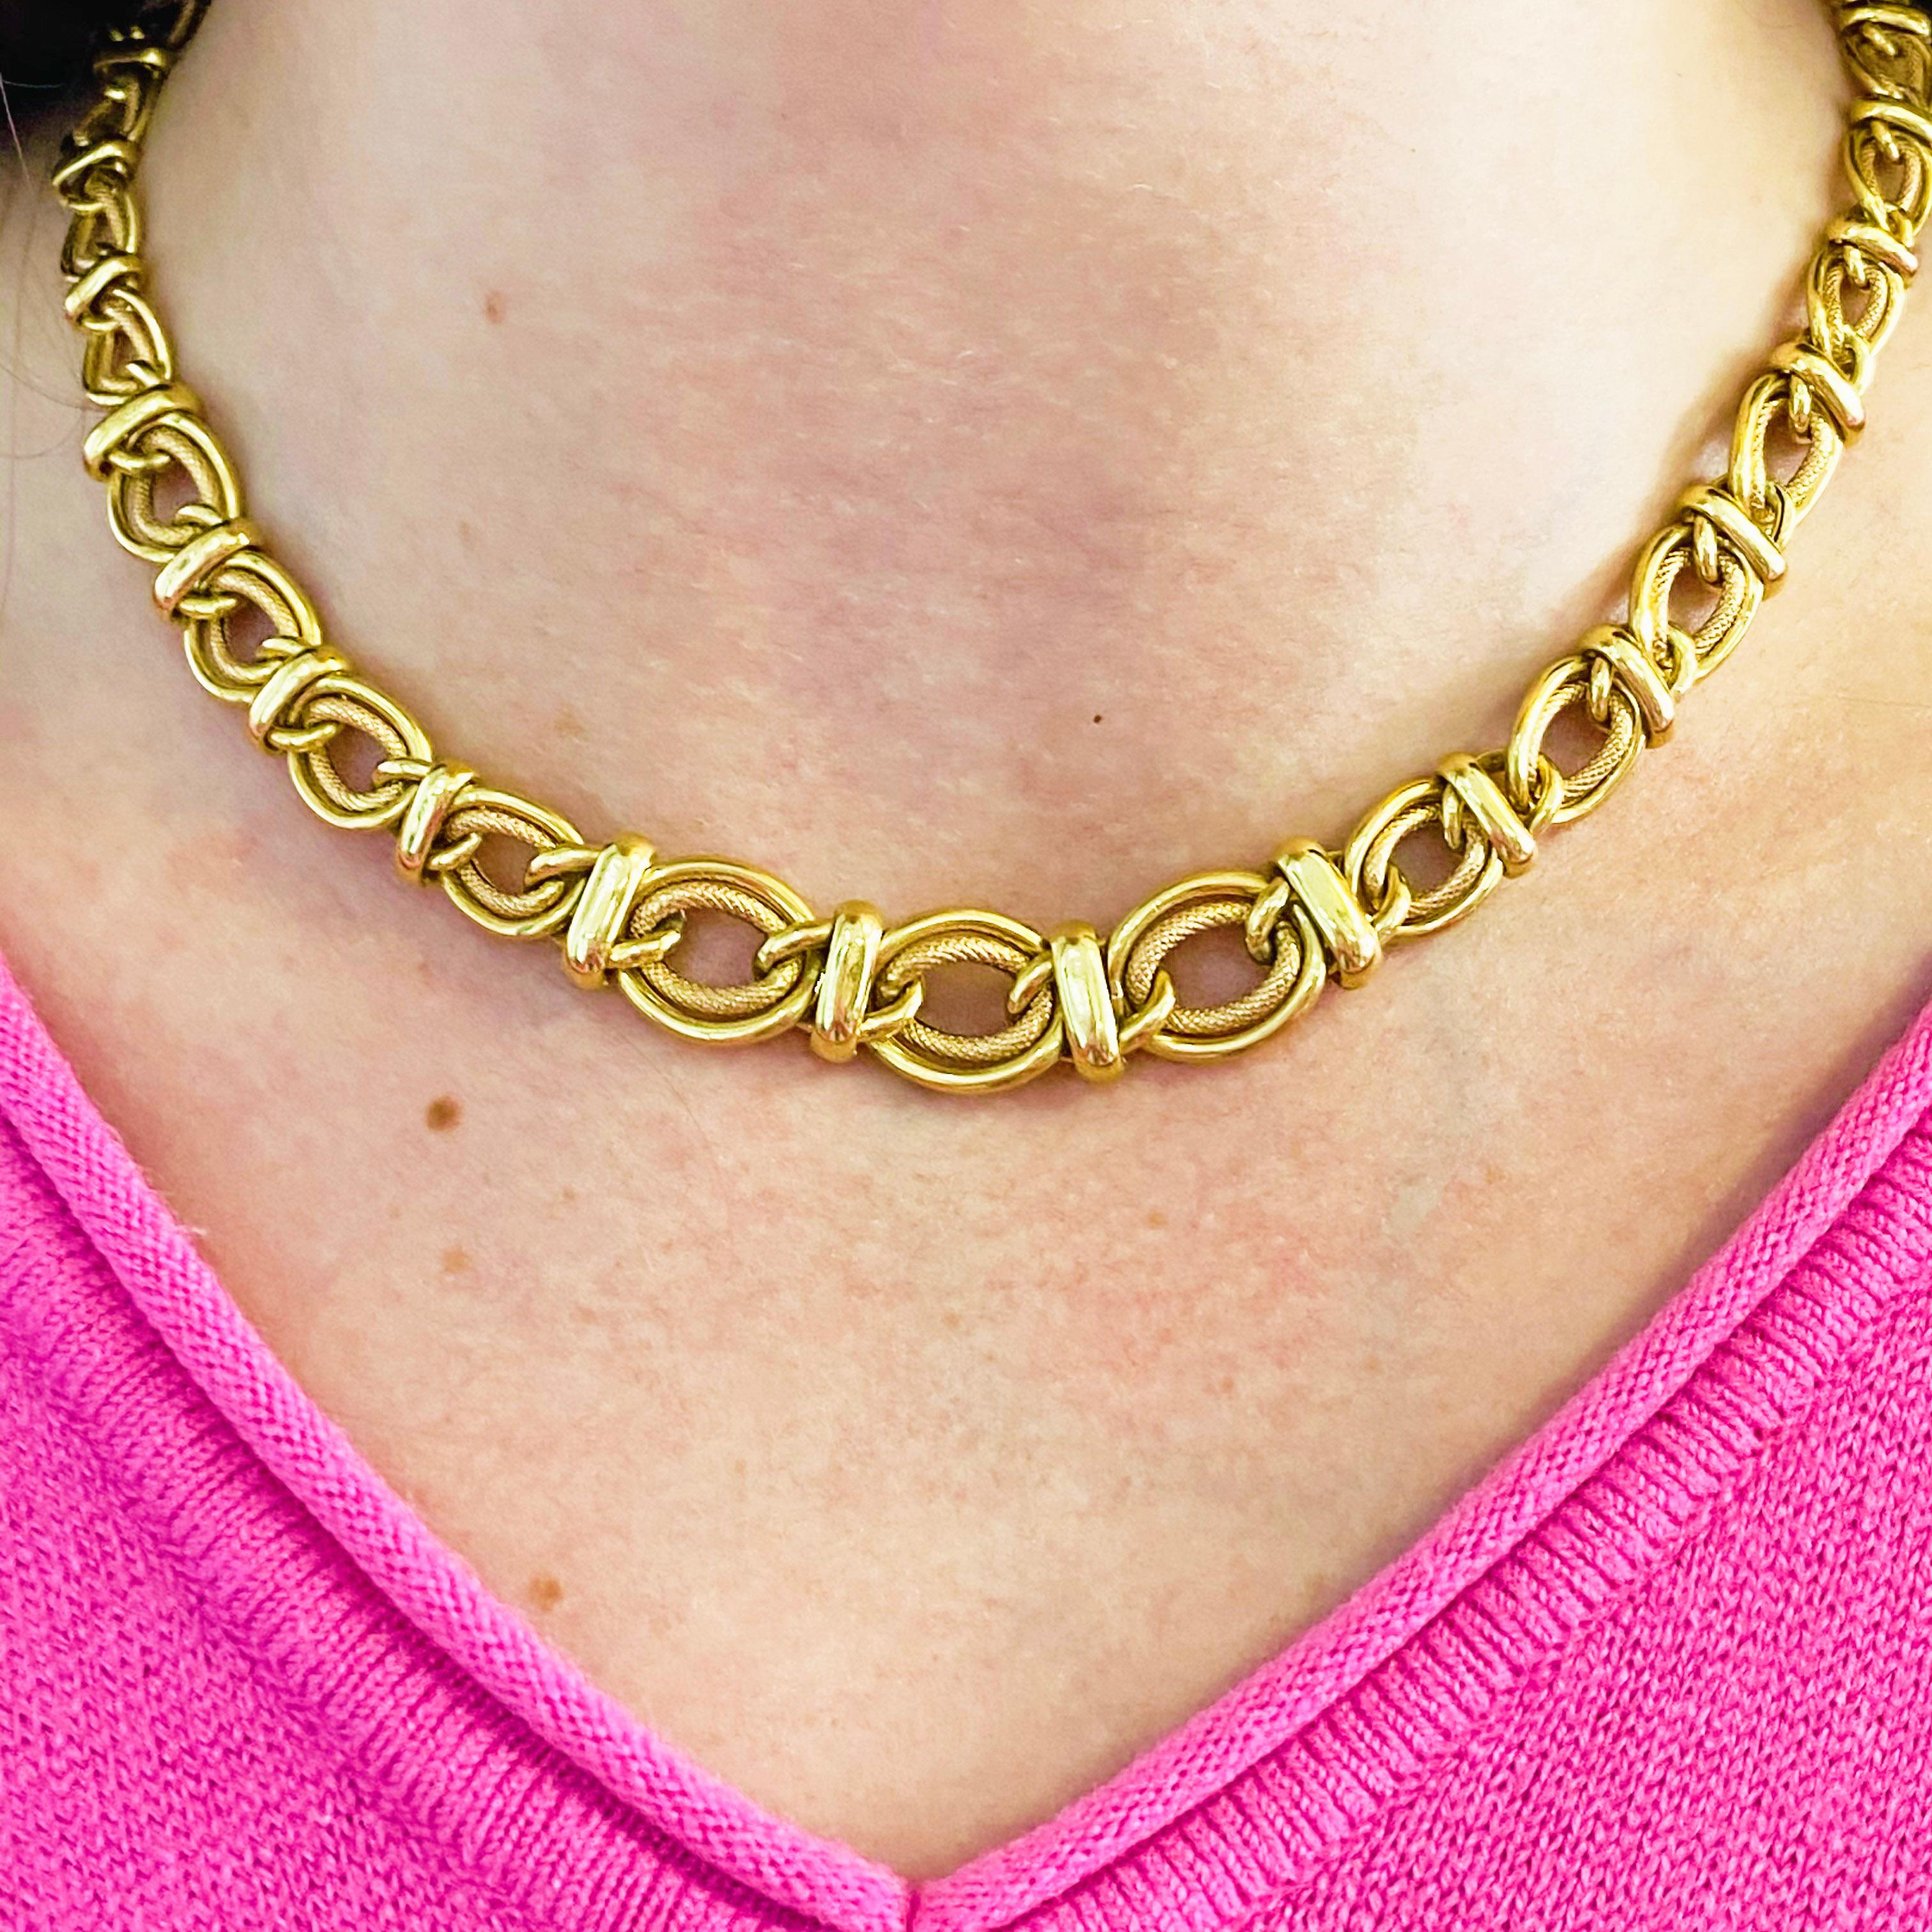 This brilliant 14 karat yellow gold chain choker necklace is extremely versatile! It provides a classic look that pairs well with both casual and formal wear. The necklace is unique in that it has a sailor’s knot on each link and it tapers to get